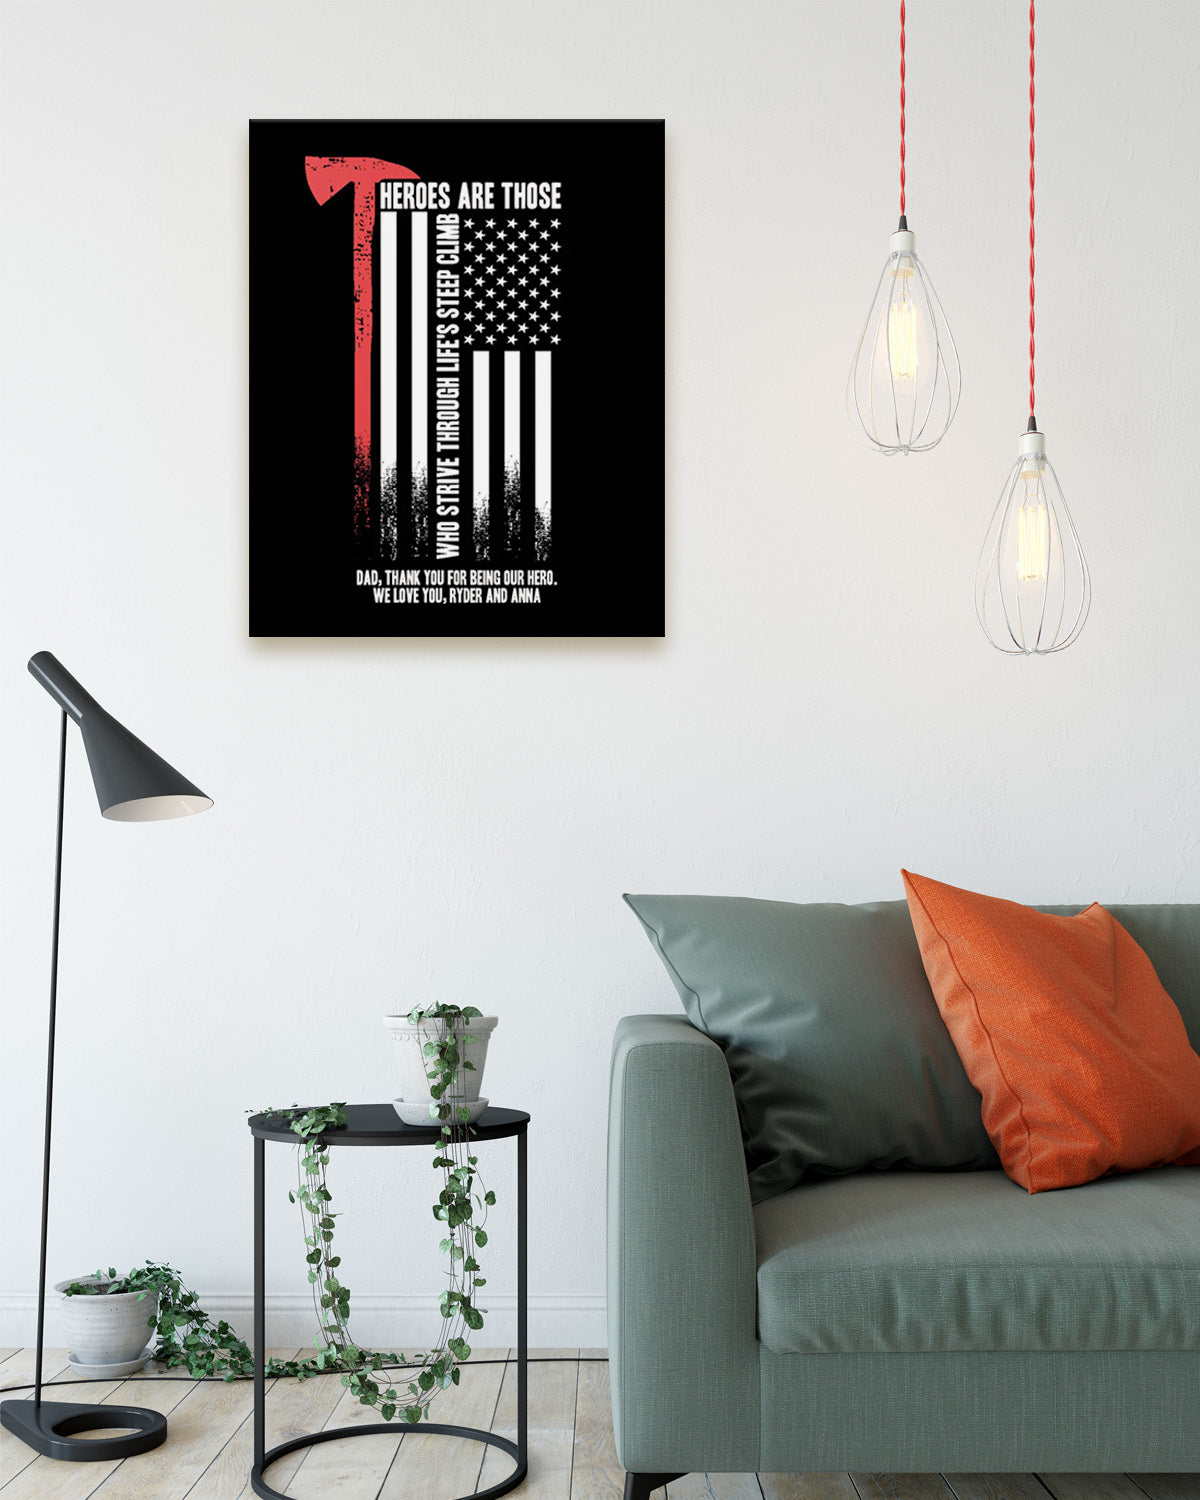 Customizable firefighter Wall decor - Heroes Are Those Who Strive -  Canvas with a black background